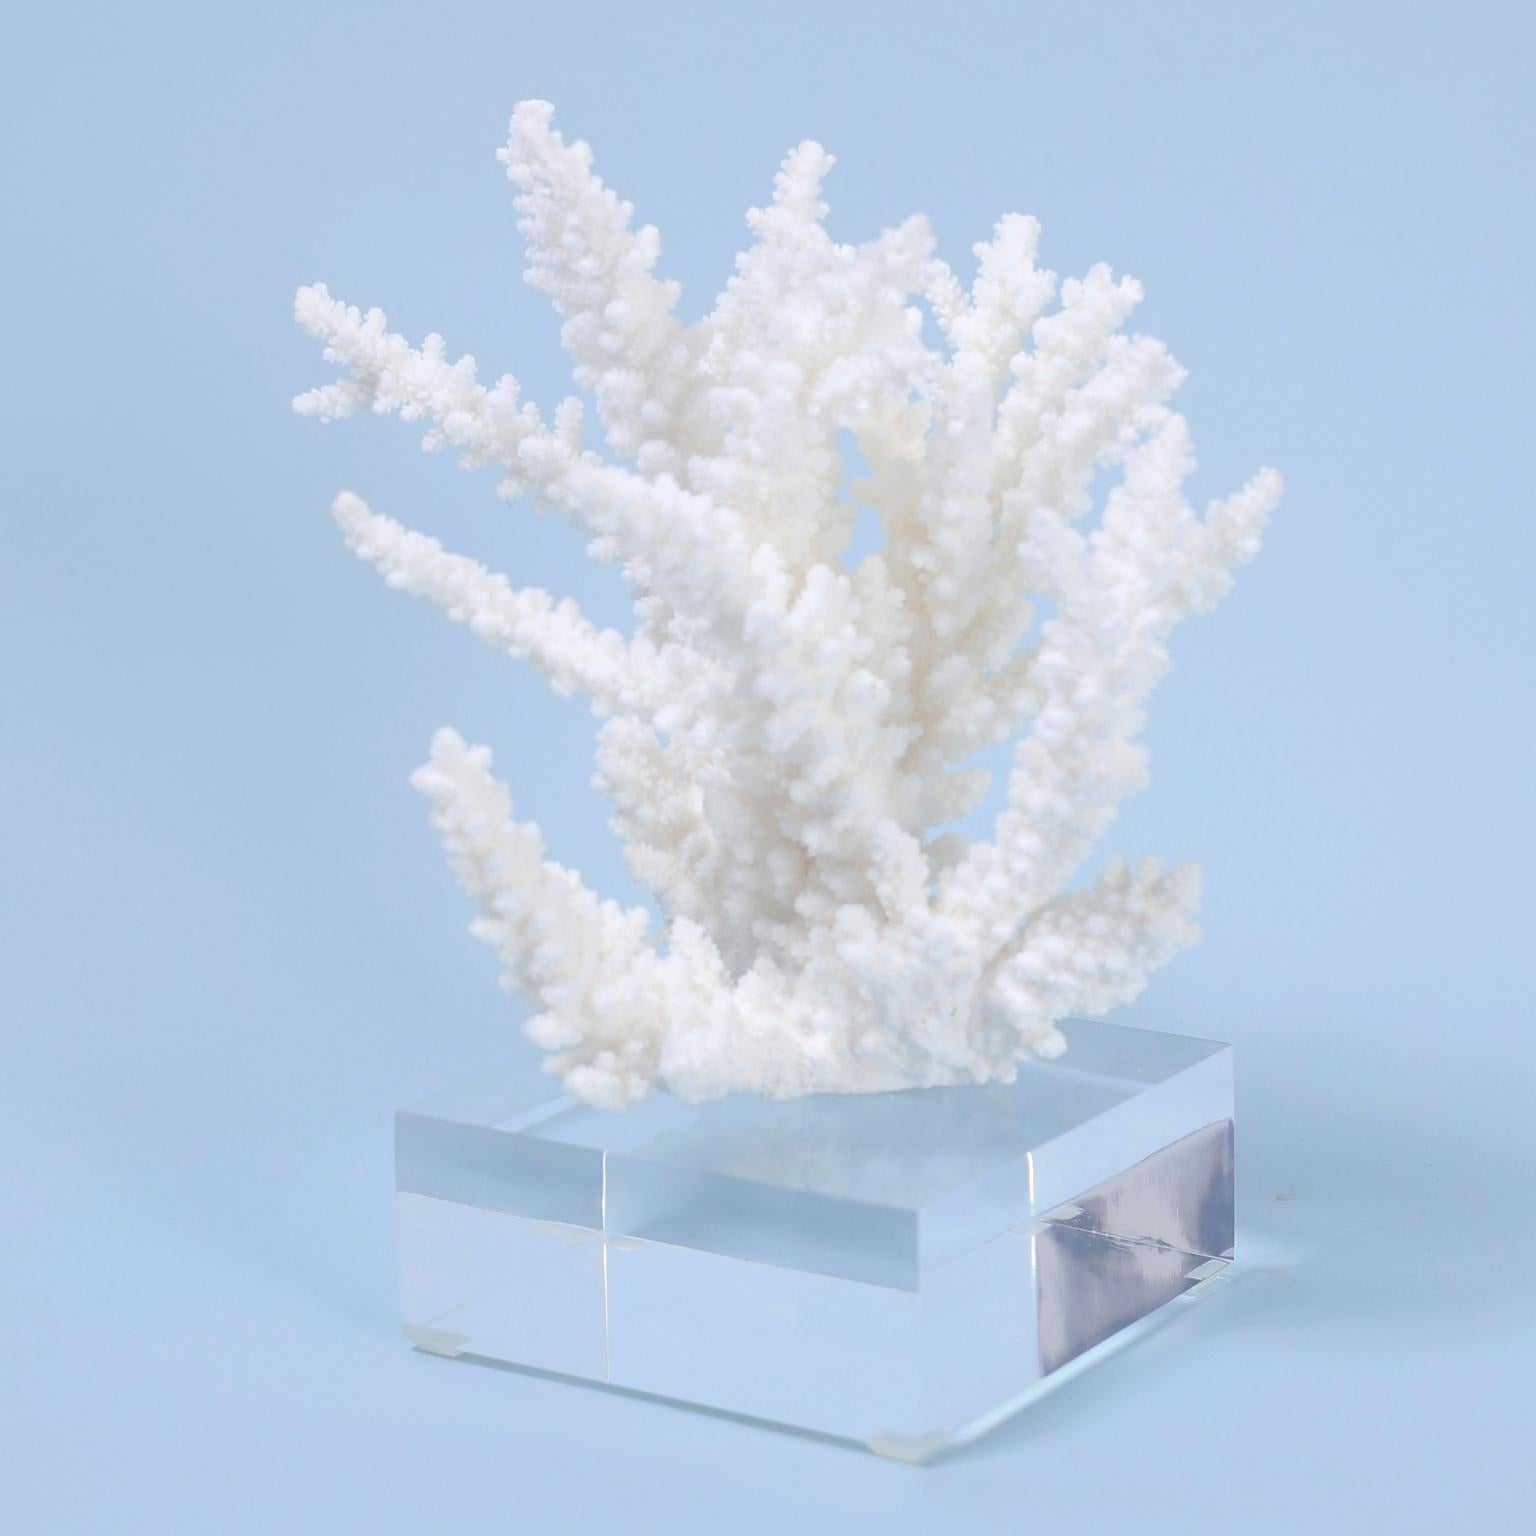 Solomon Islands Three Branch Corals on Lucite, Priced Individually